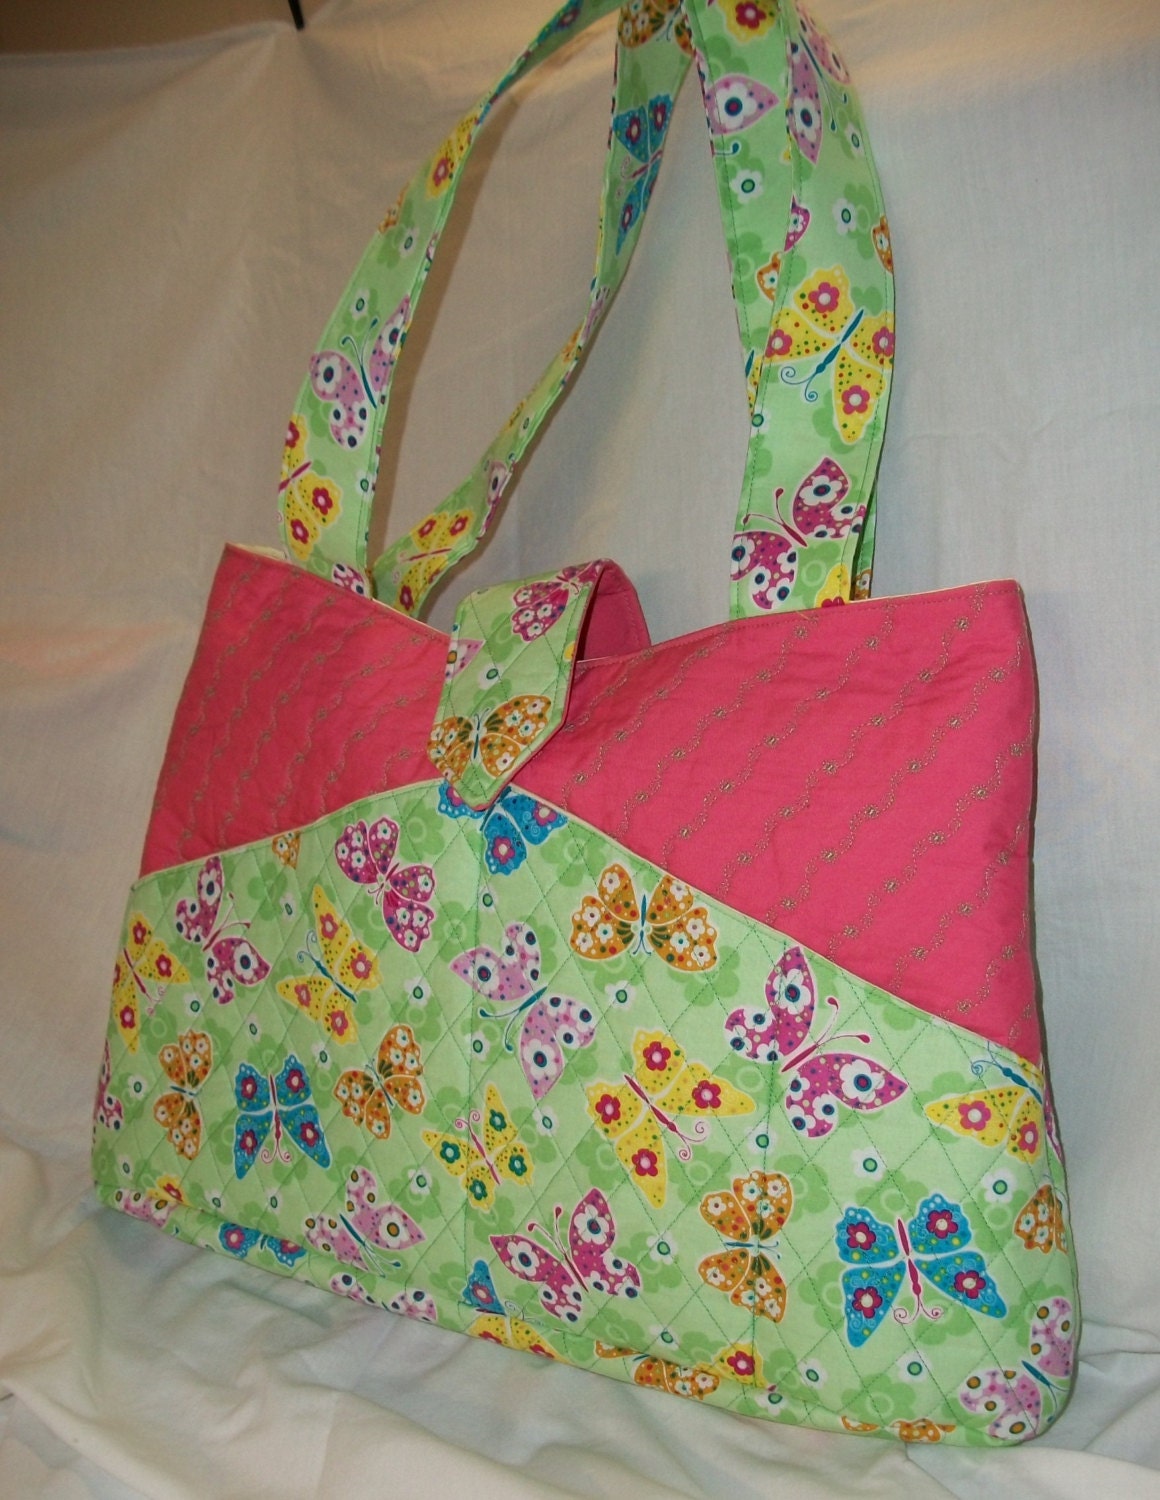 VERY Cute and girly Quilted baby diaper bag with butterflies